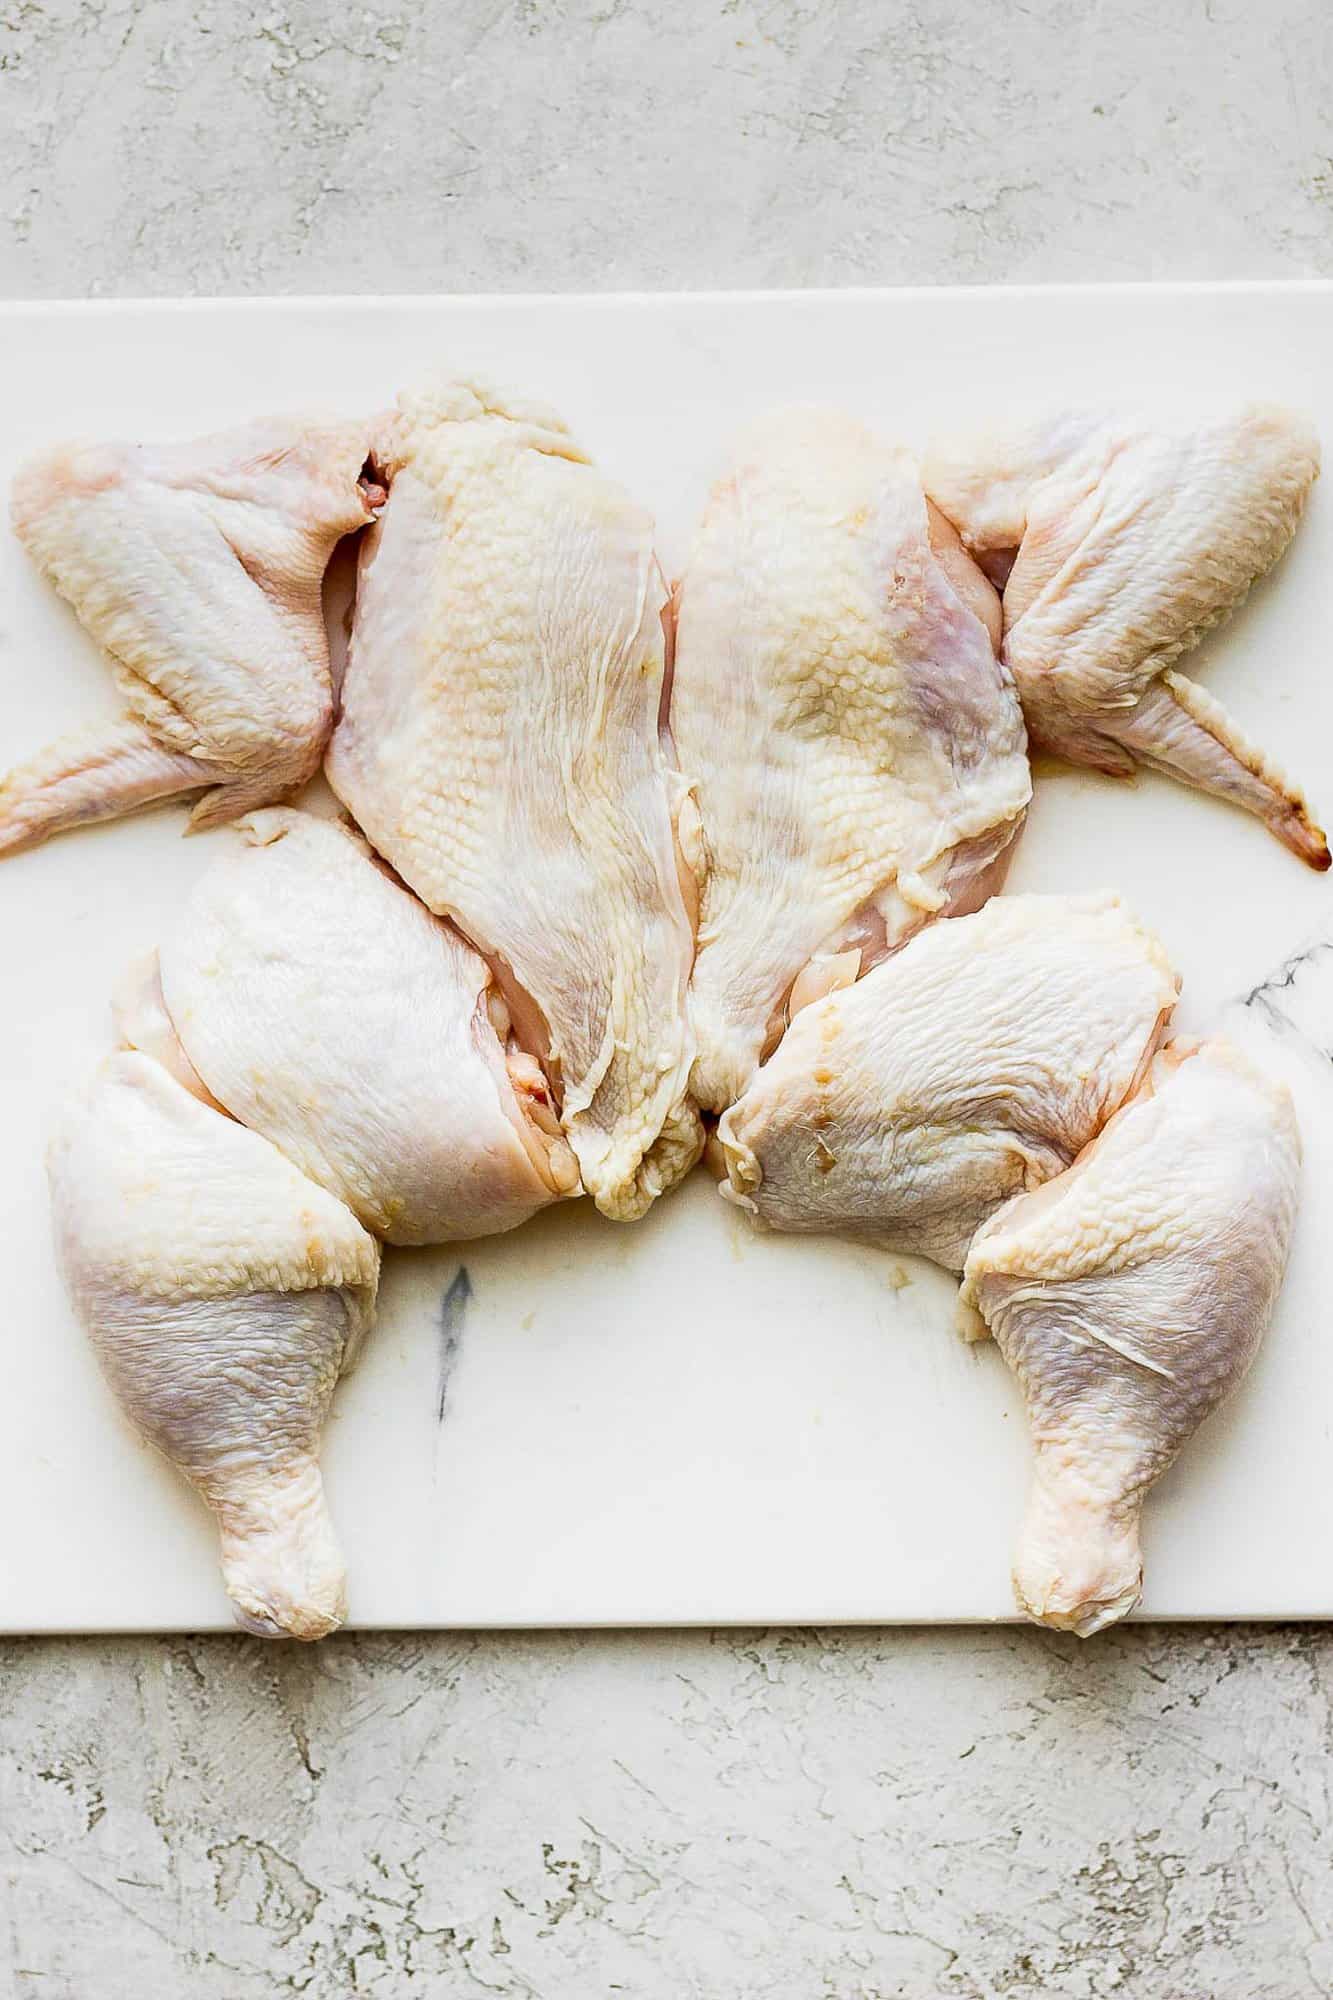 The 8 Best Poultry Shears to Cut Through Any Bird